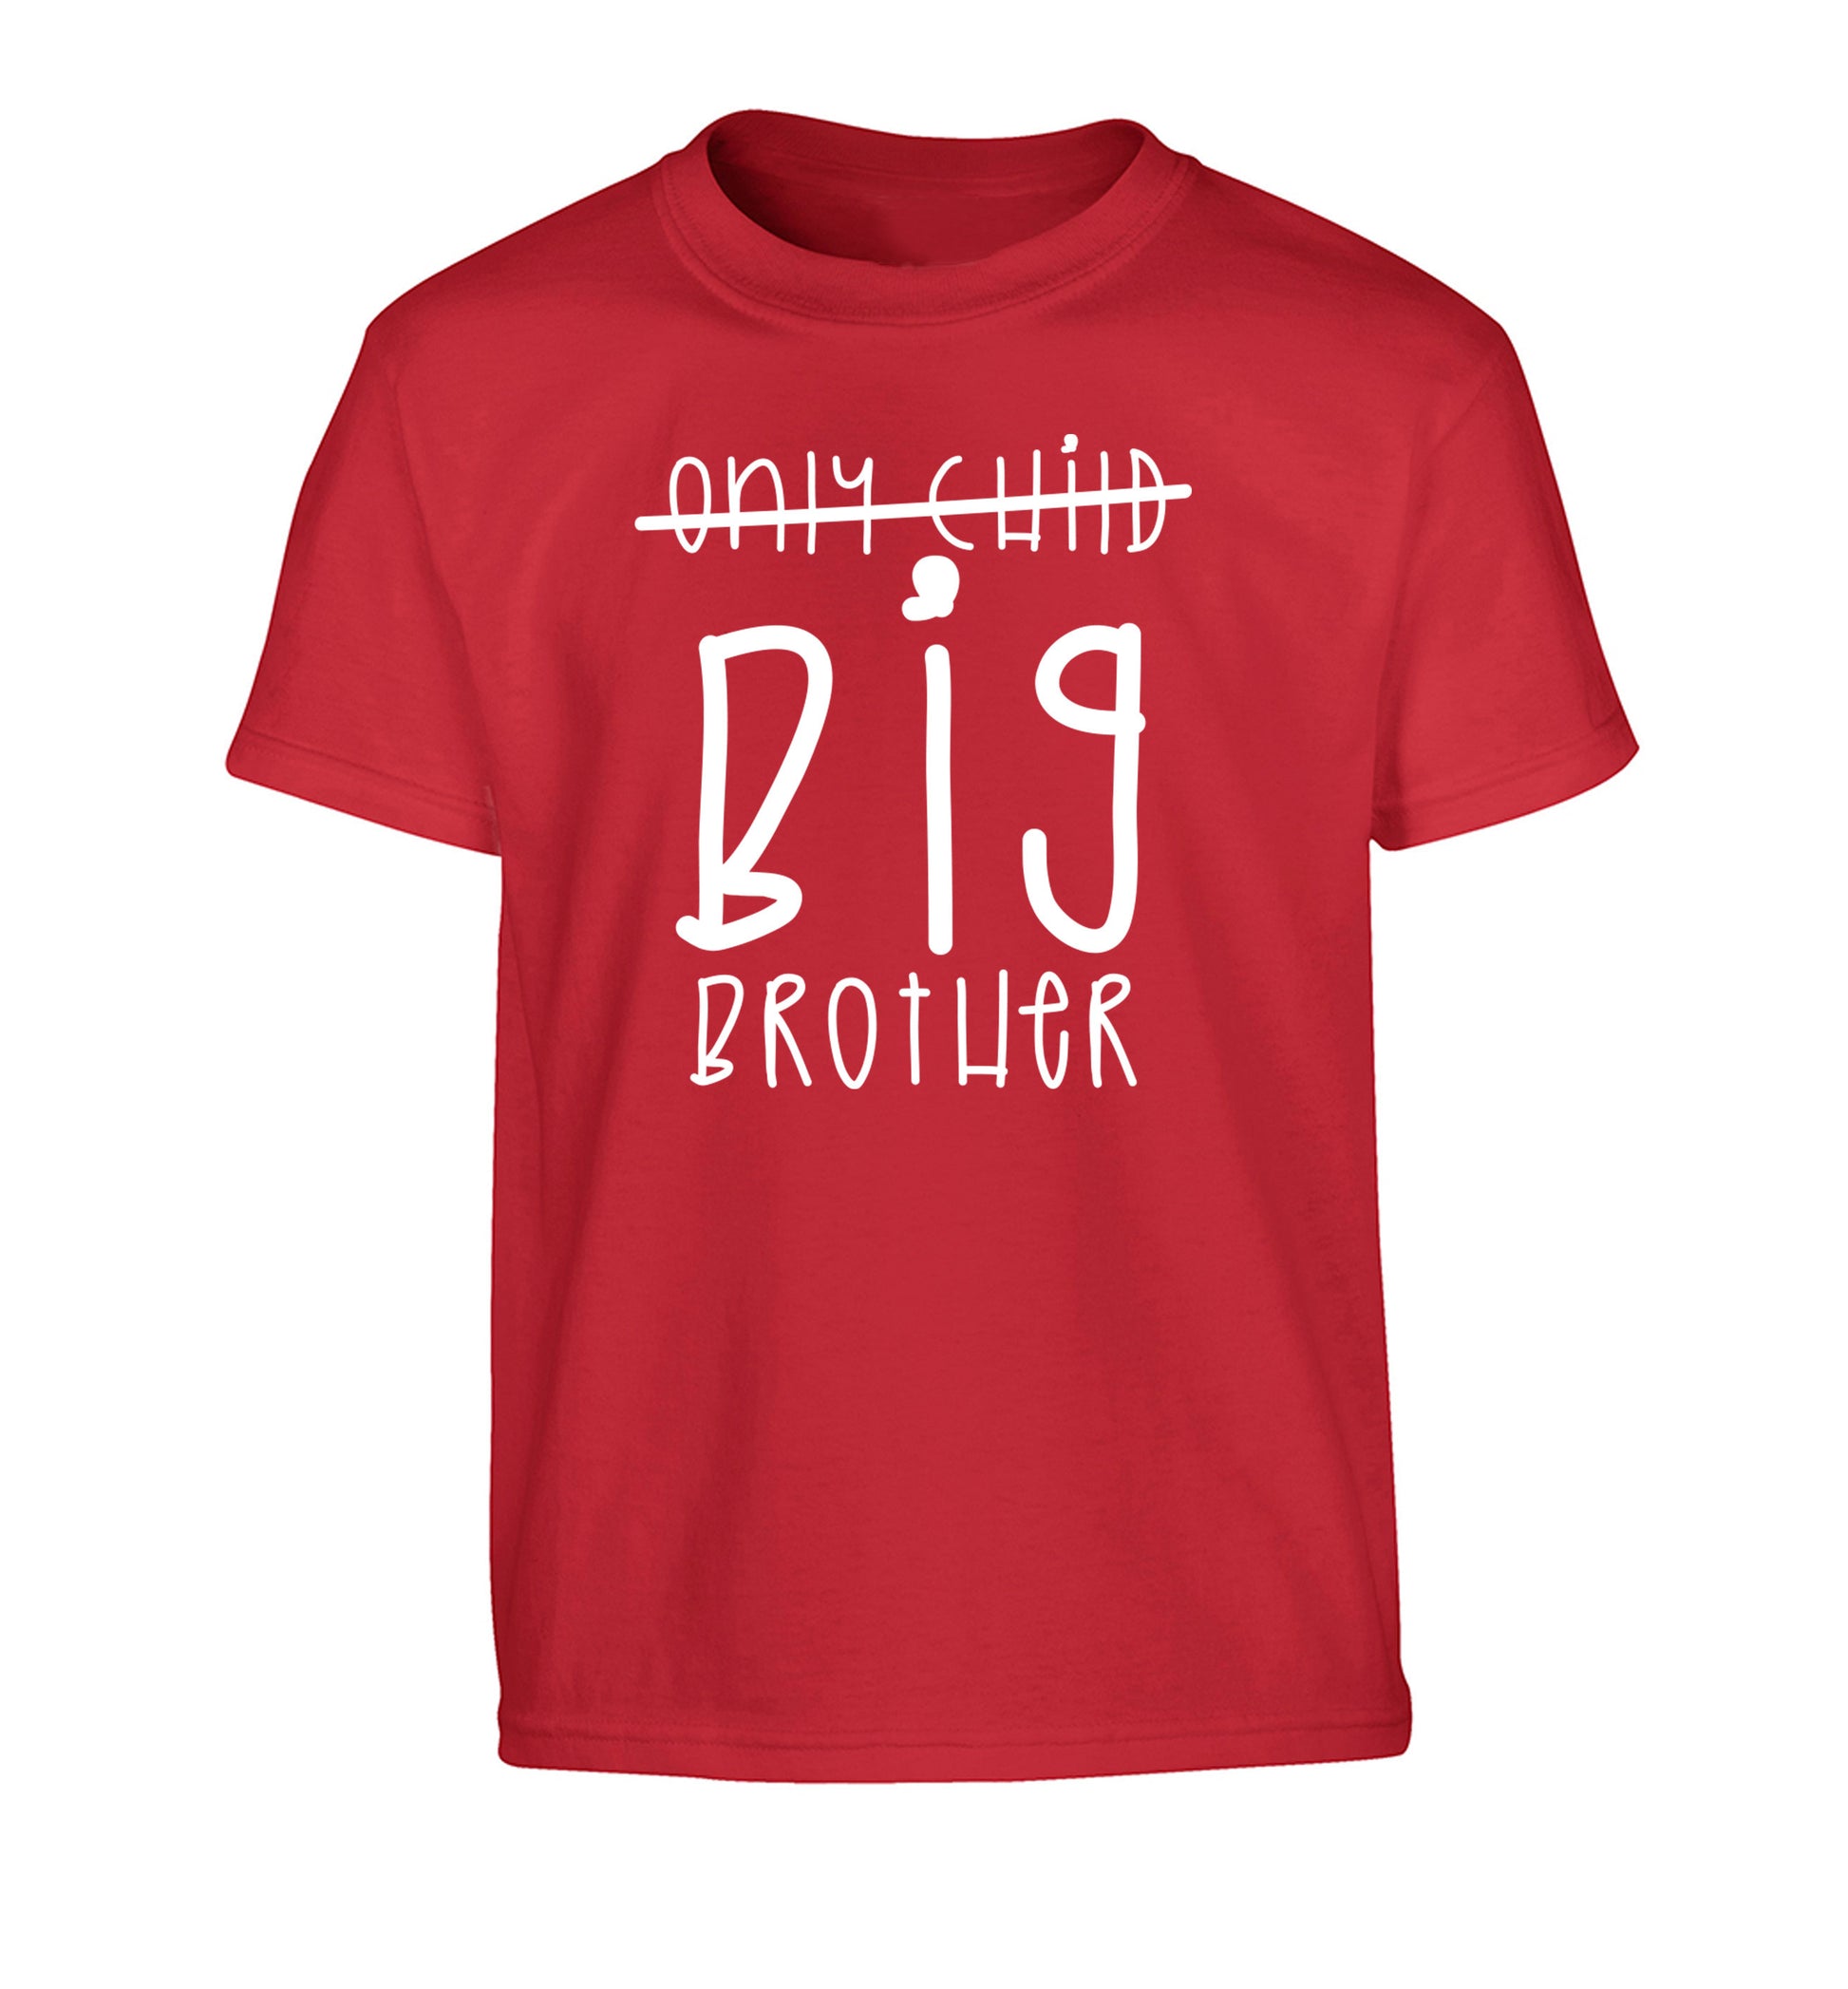 Only child big brother Children's red Tshirt 12-14 Years